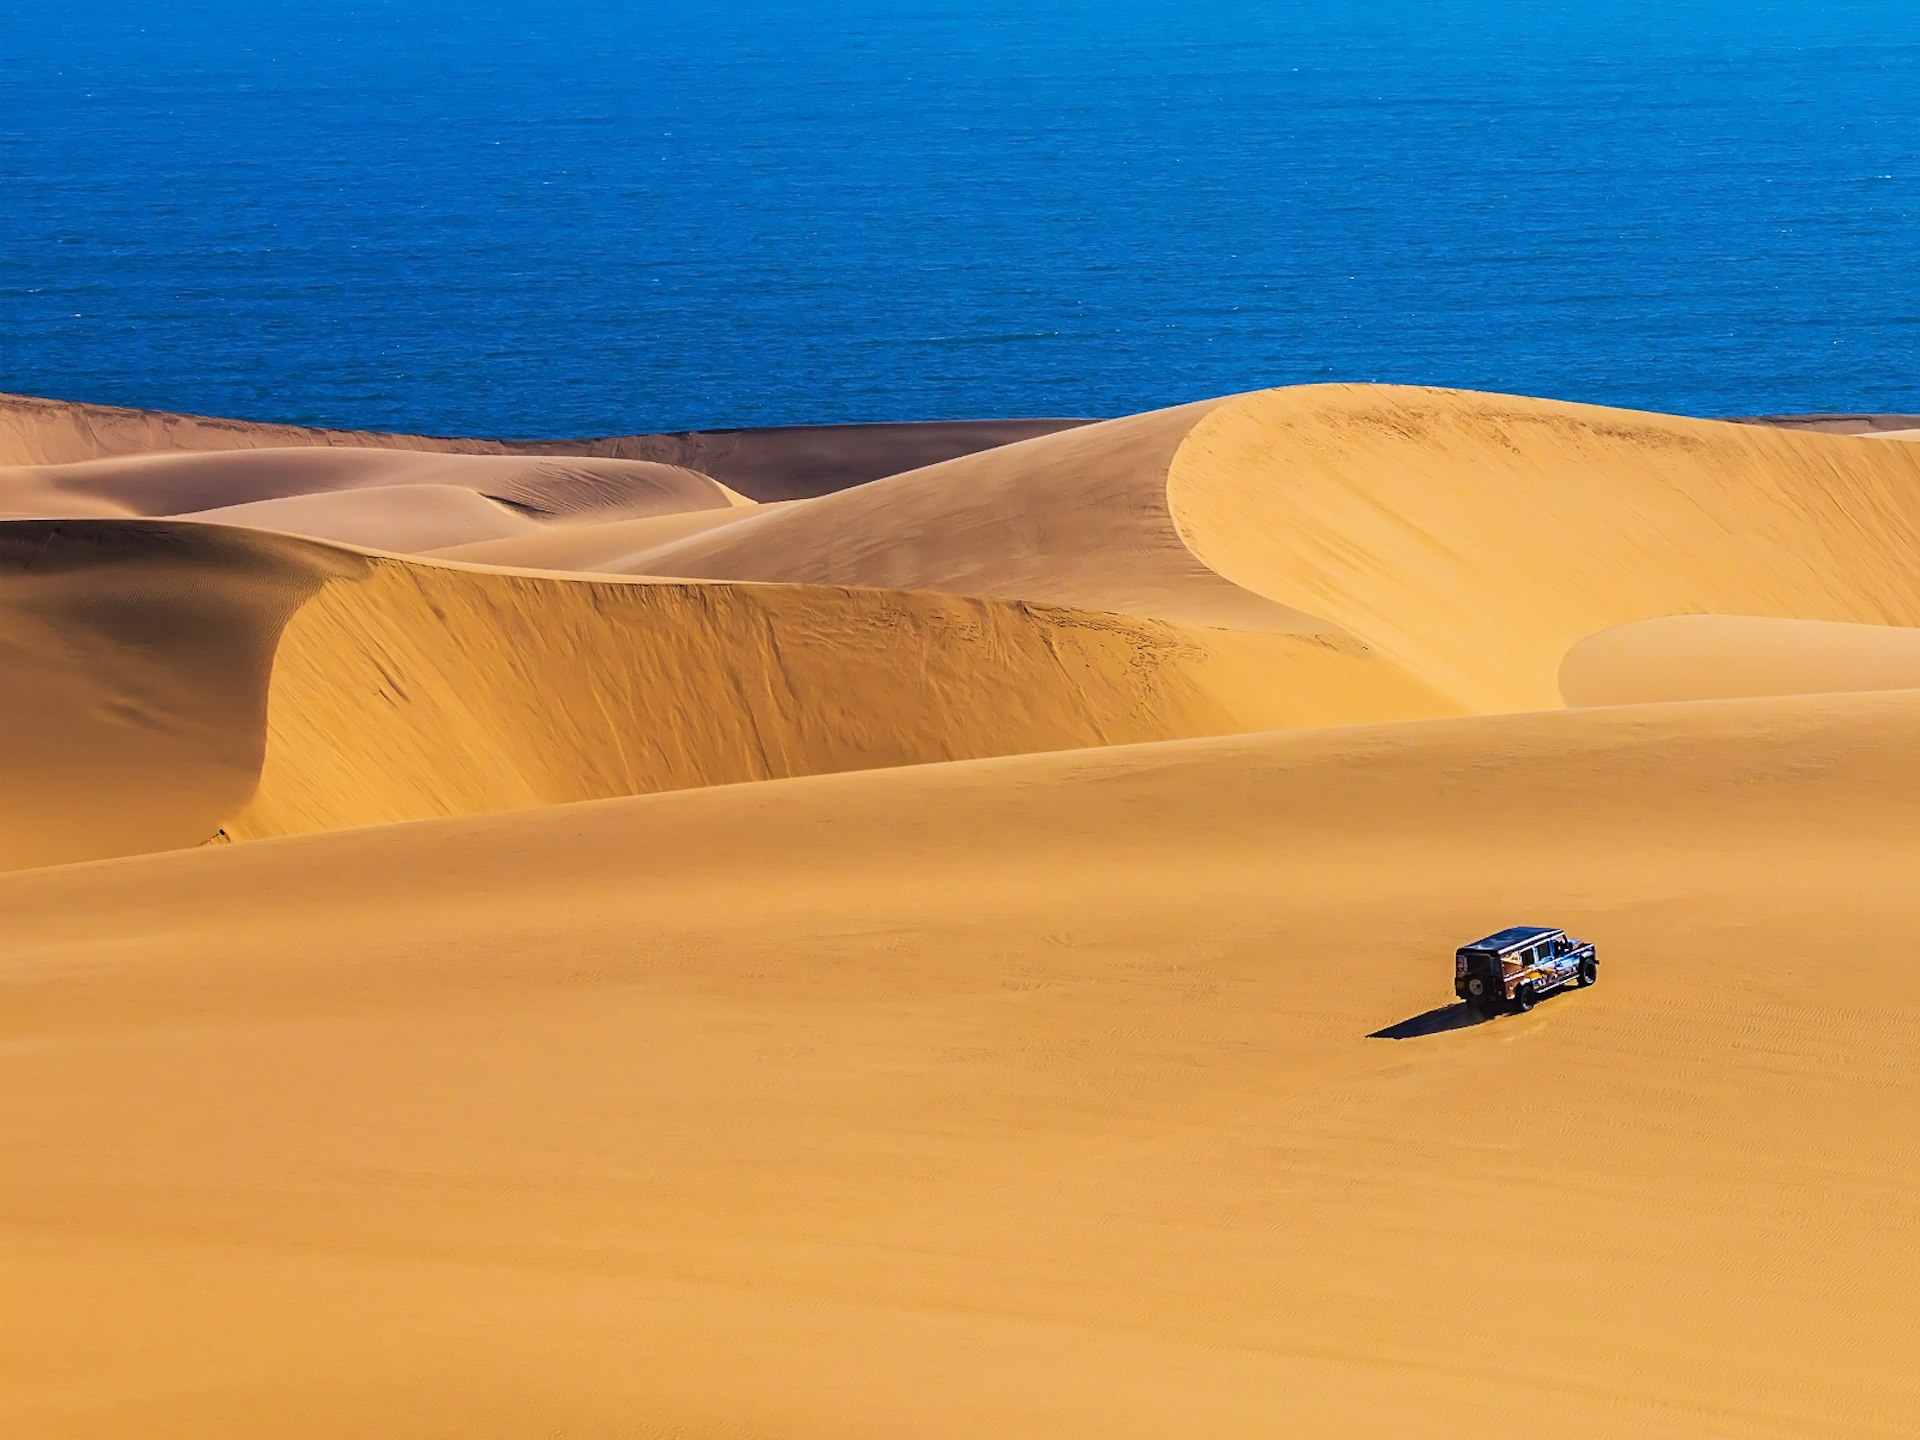 A 4x4 driving towards the coast cover the sand dunes in Sandwich Harbour, Namibia